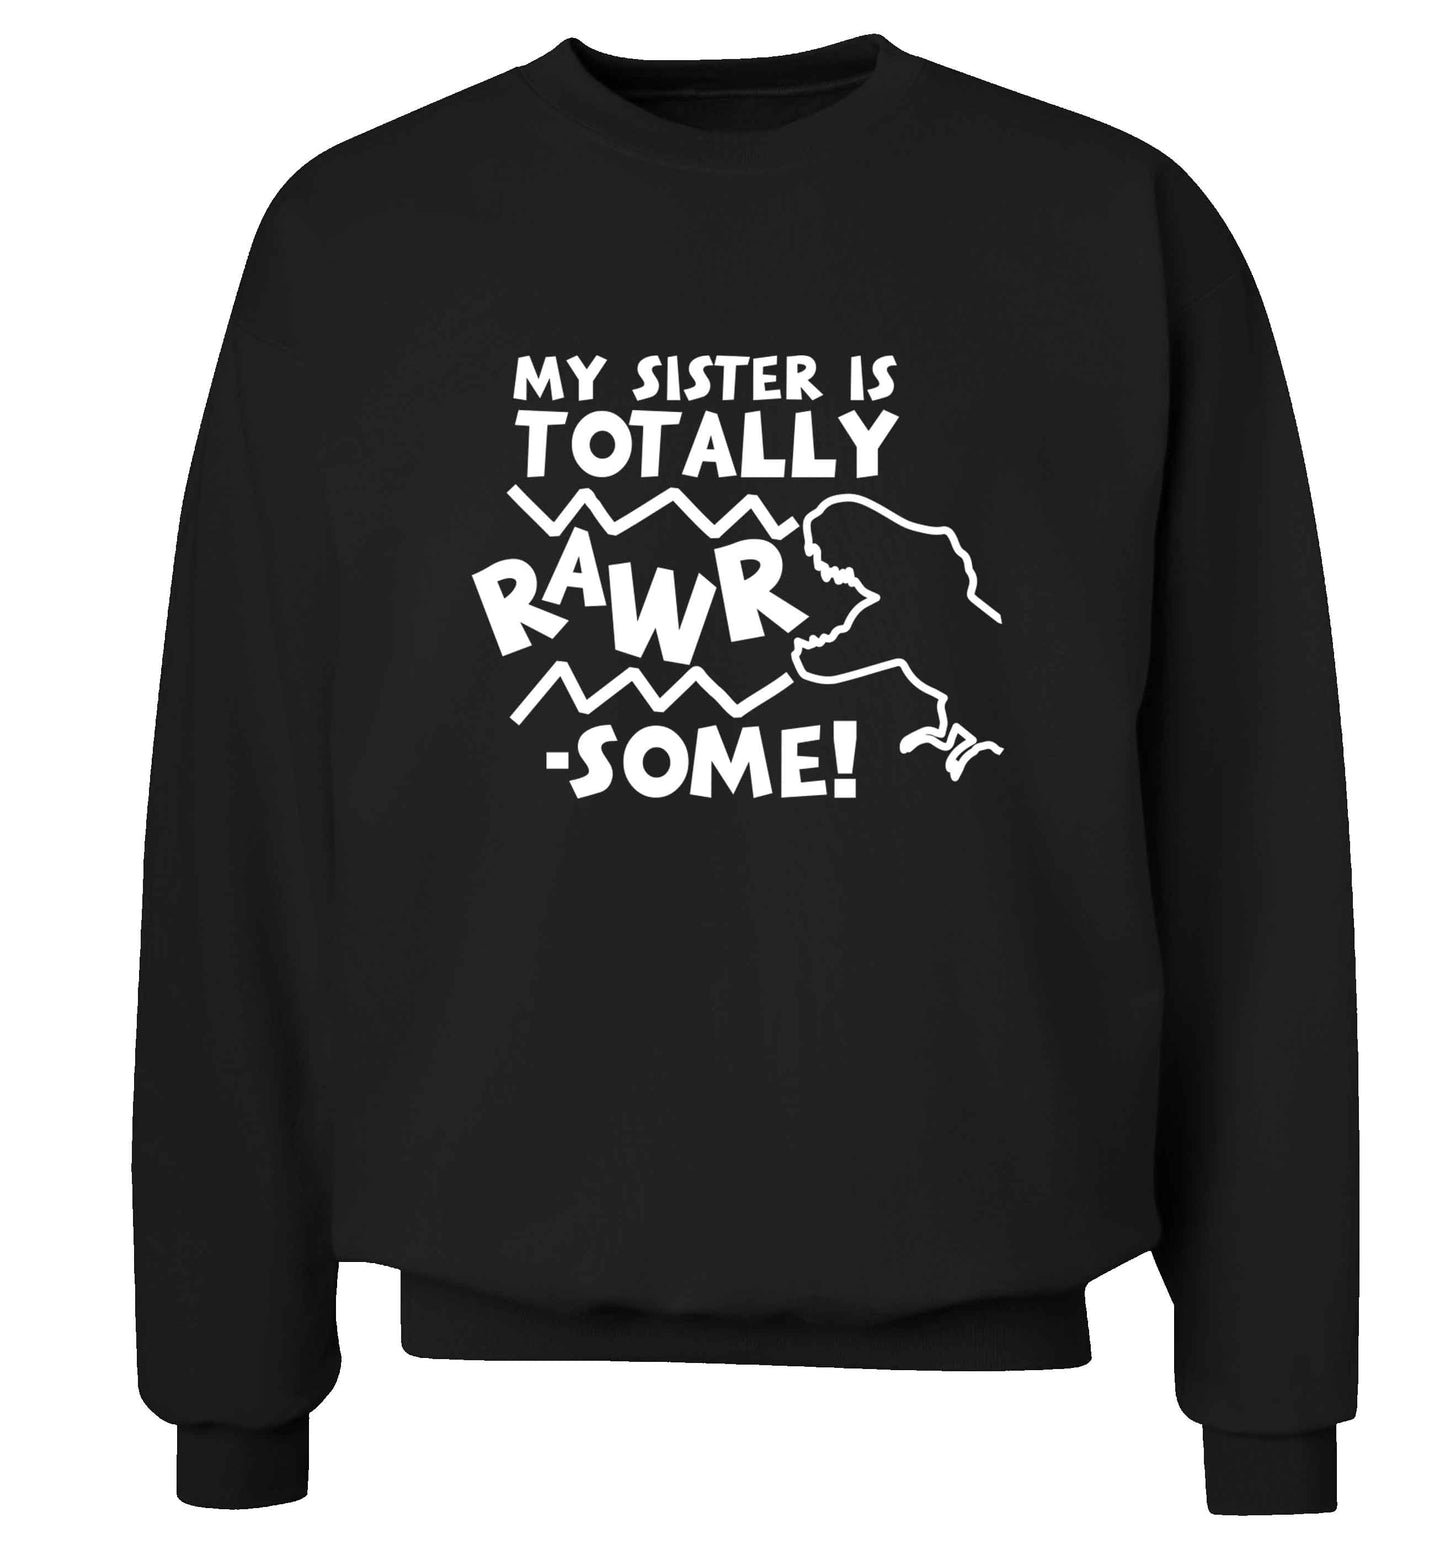 My sister is totally rawrsome adult's unisex black sweater 2XL